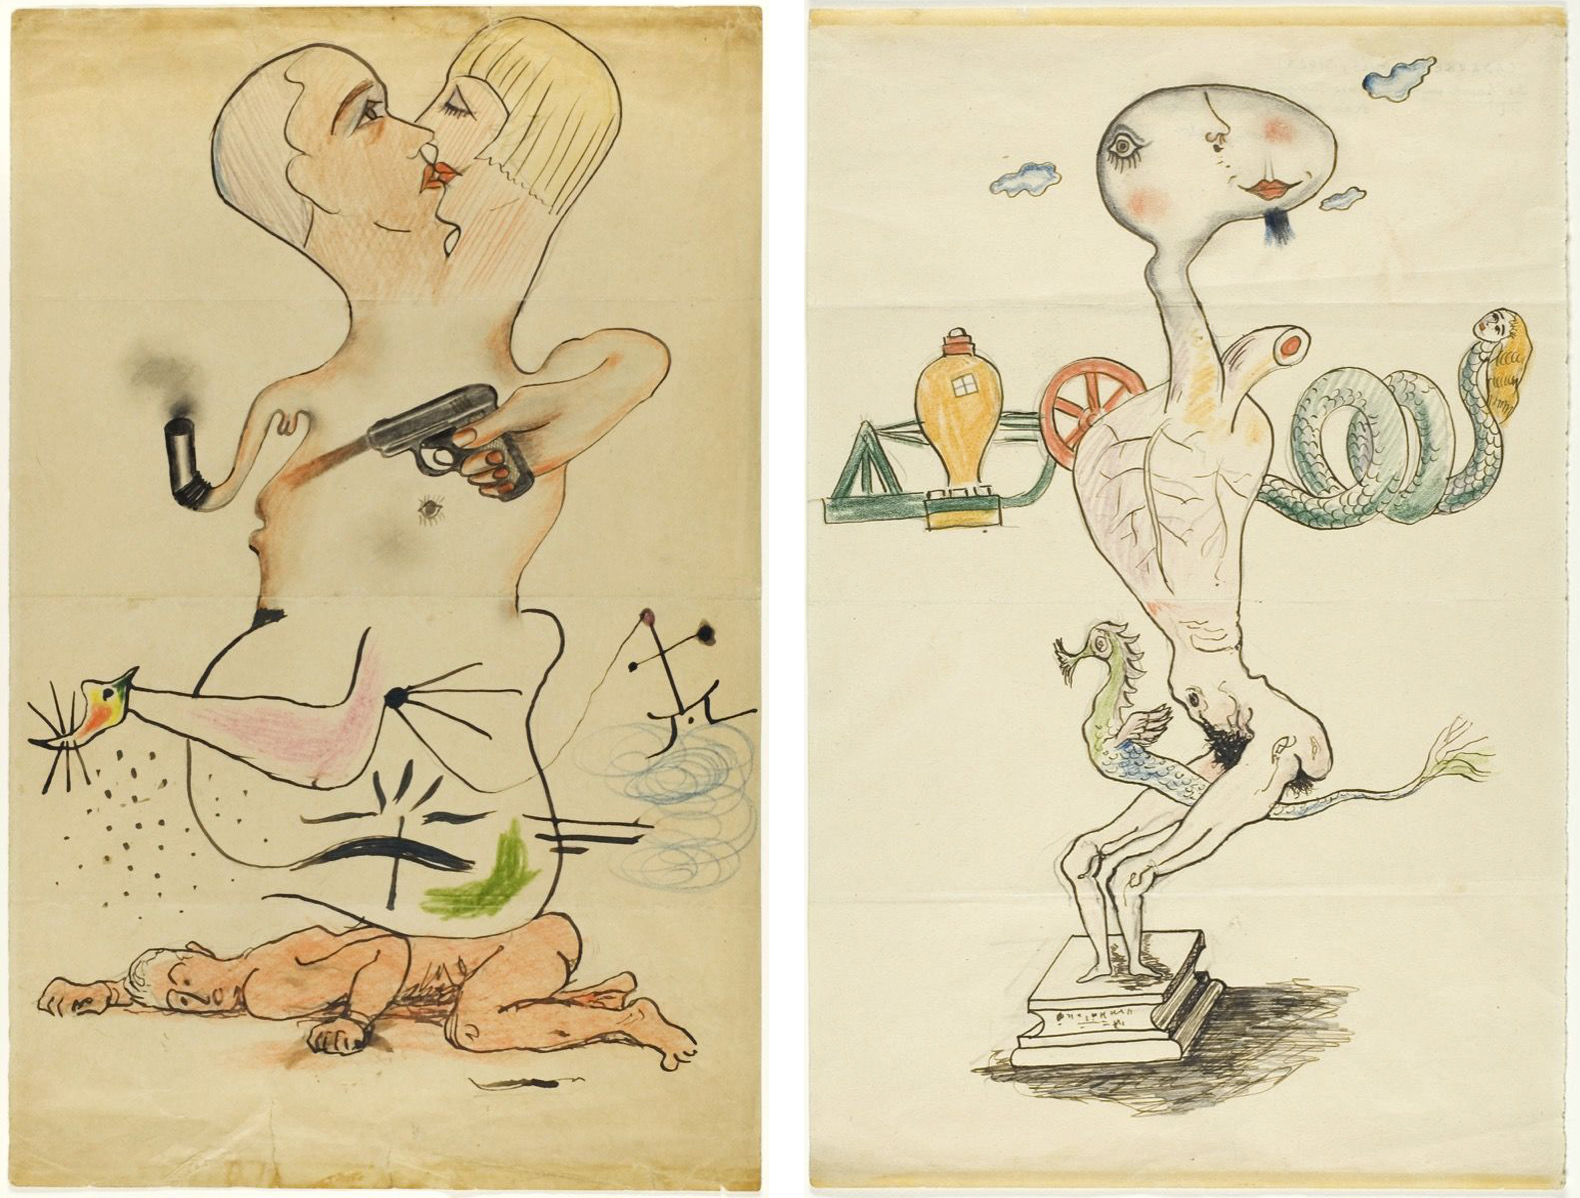 Left: Exquisite Corpse drawing by Yves Tanguy, Joan Miró, Max Morise, and Man Ray, 1927, ink and pencil on paper, 14 1/8 x 9 inches (MoMA); Right: Exquisite Corpse drawing by Yves Tanguy, André Breton, Max Morise, and Man Ray, c. 1927